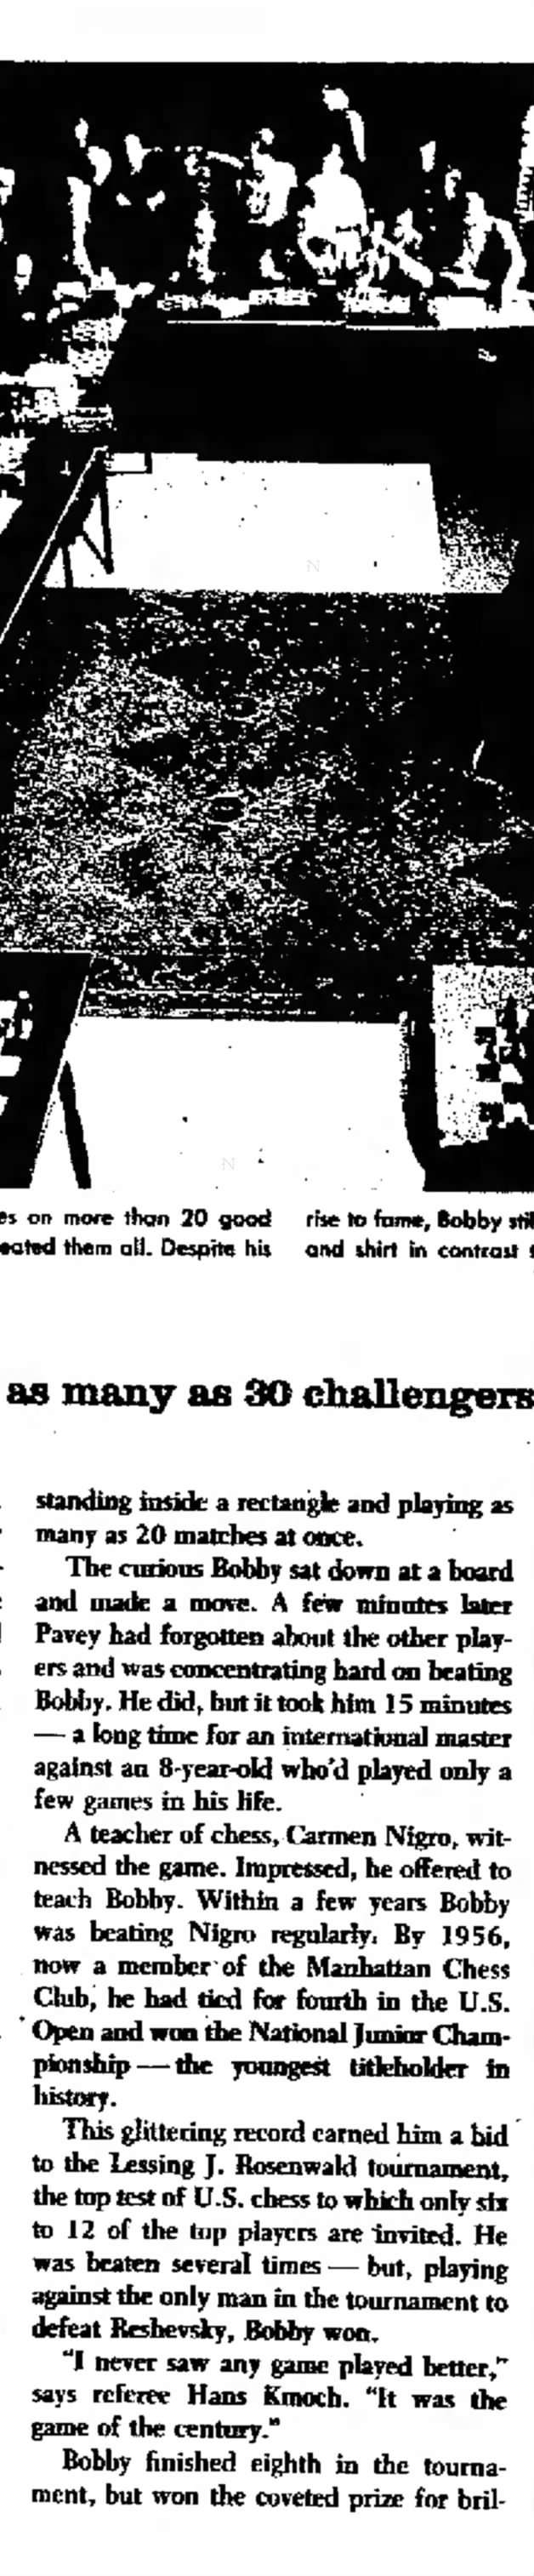 Only 14, he's a chess whiz (Column 5)